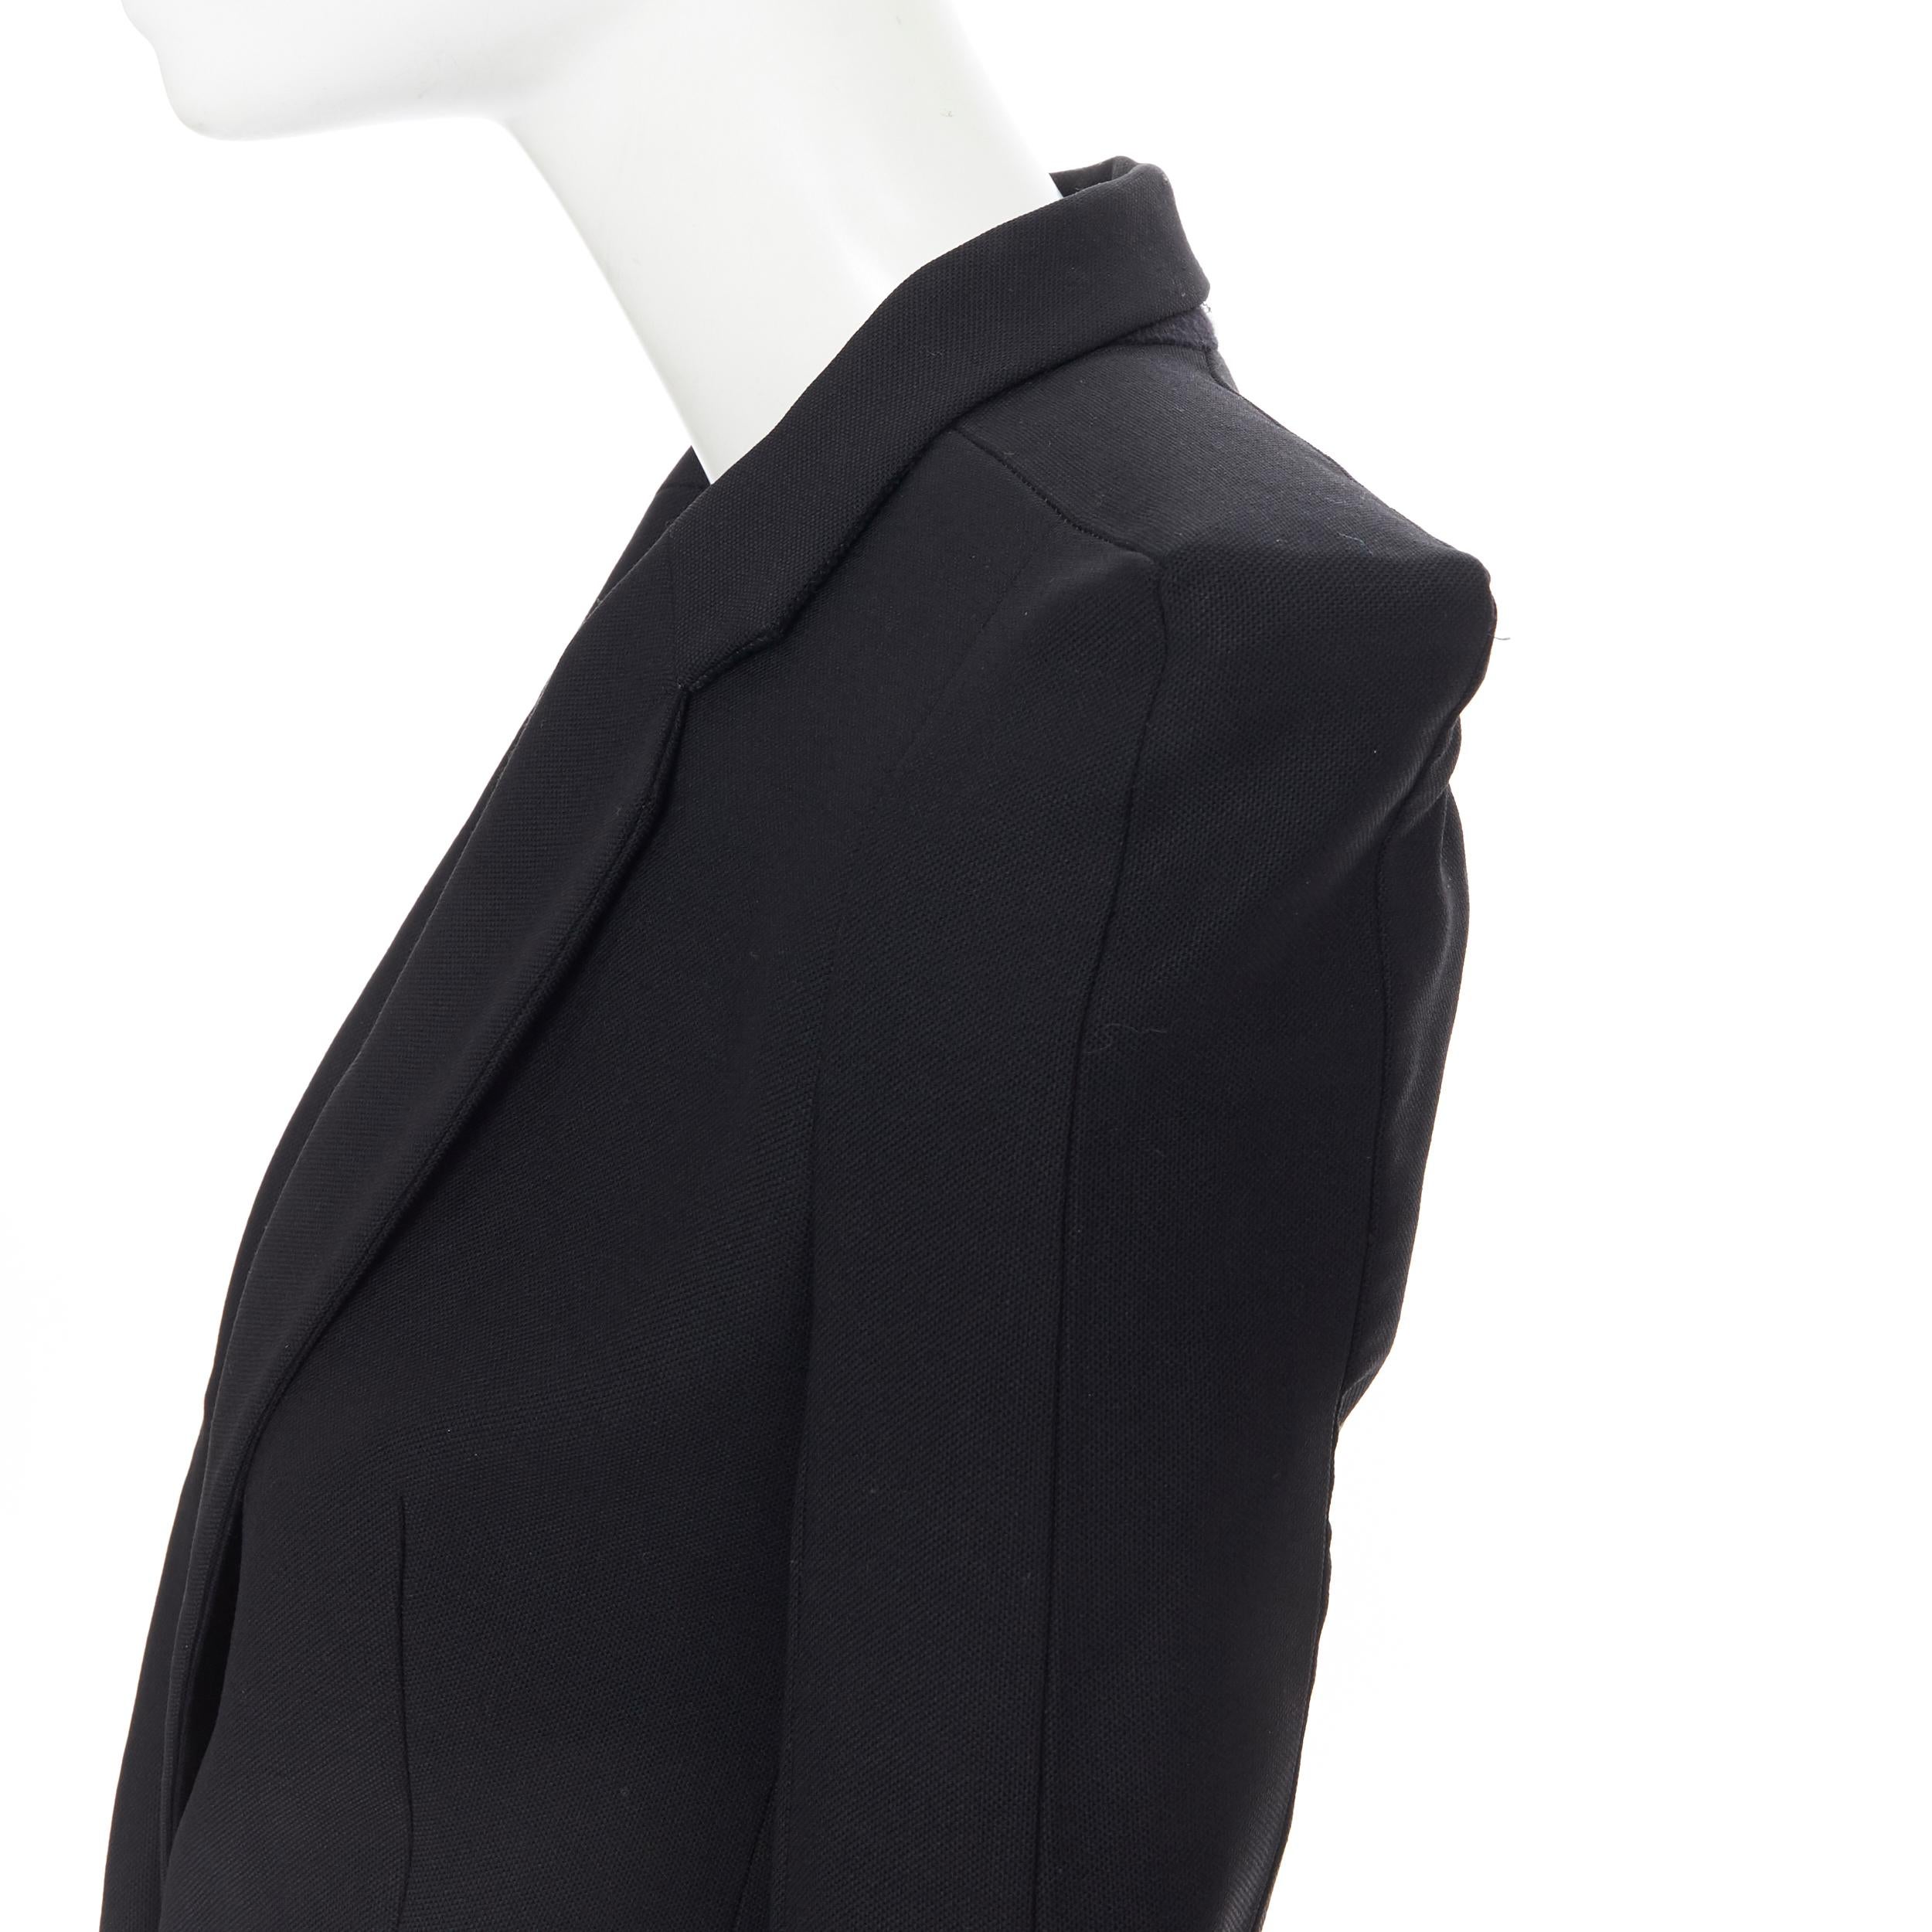 MAISON MARTIN MARGIELA 2007 square cut padded shoulder blazer jacket IT36 XS 
Reference: TGAS/A05510 
Brand: Maison Margiela 
Designer: Martin Margiela 
Collection: Fall Winter 2007 
Material: Wool 
Color: Black 
Pattern: Solid 
Closure: Button